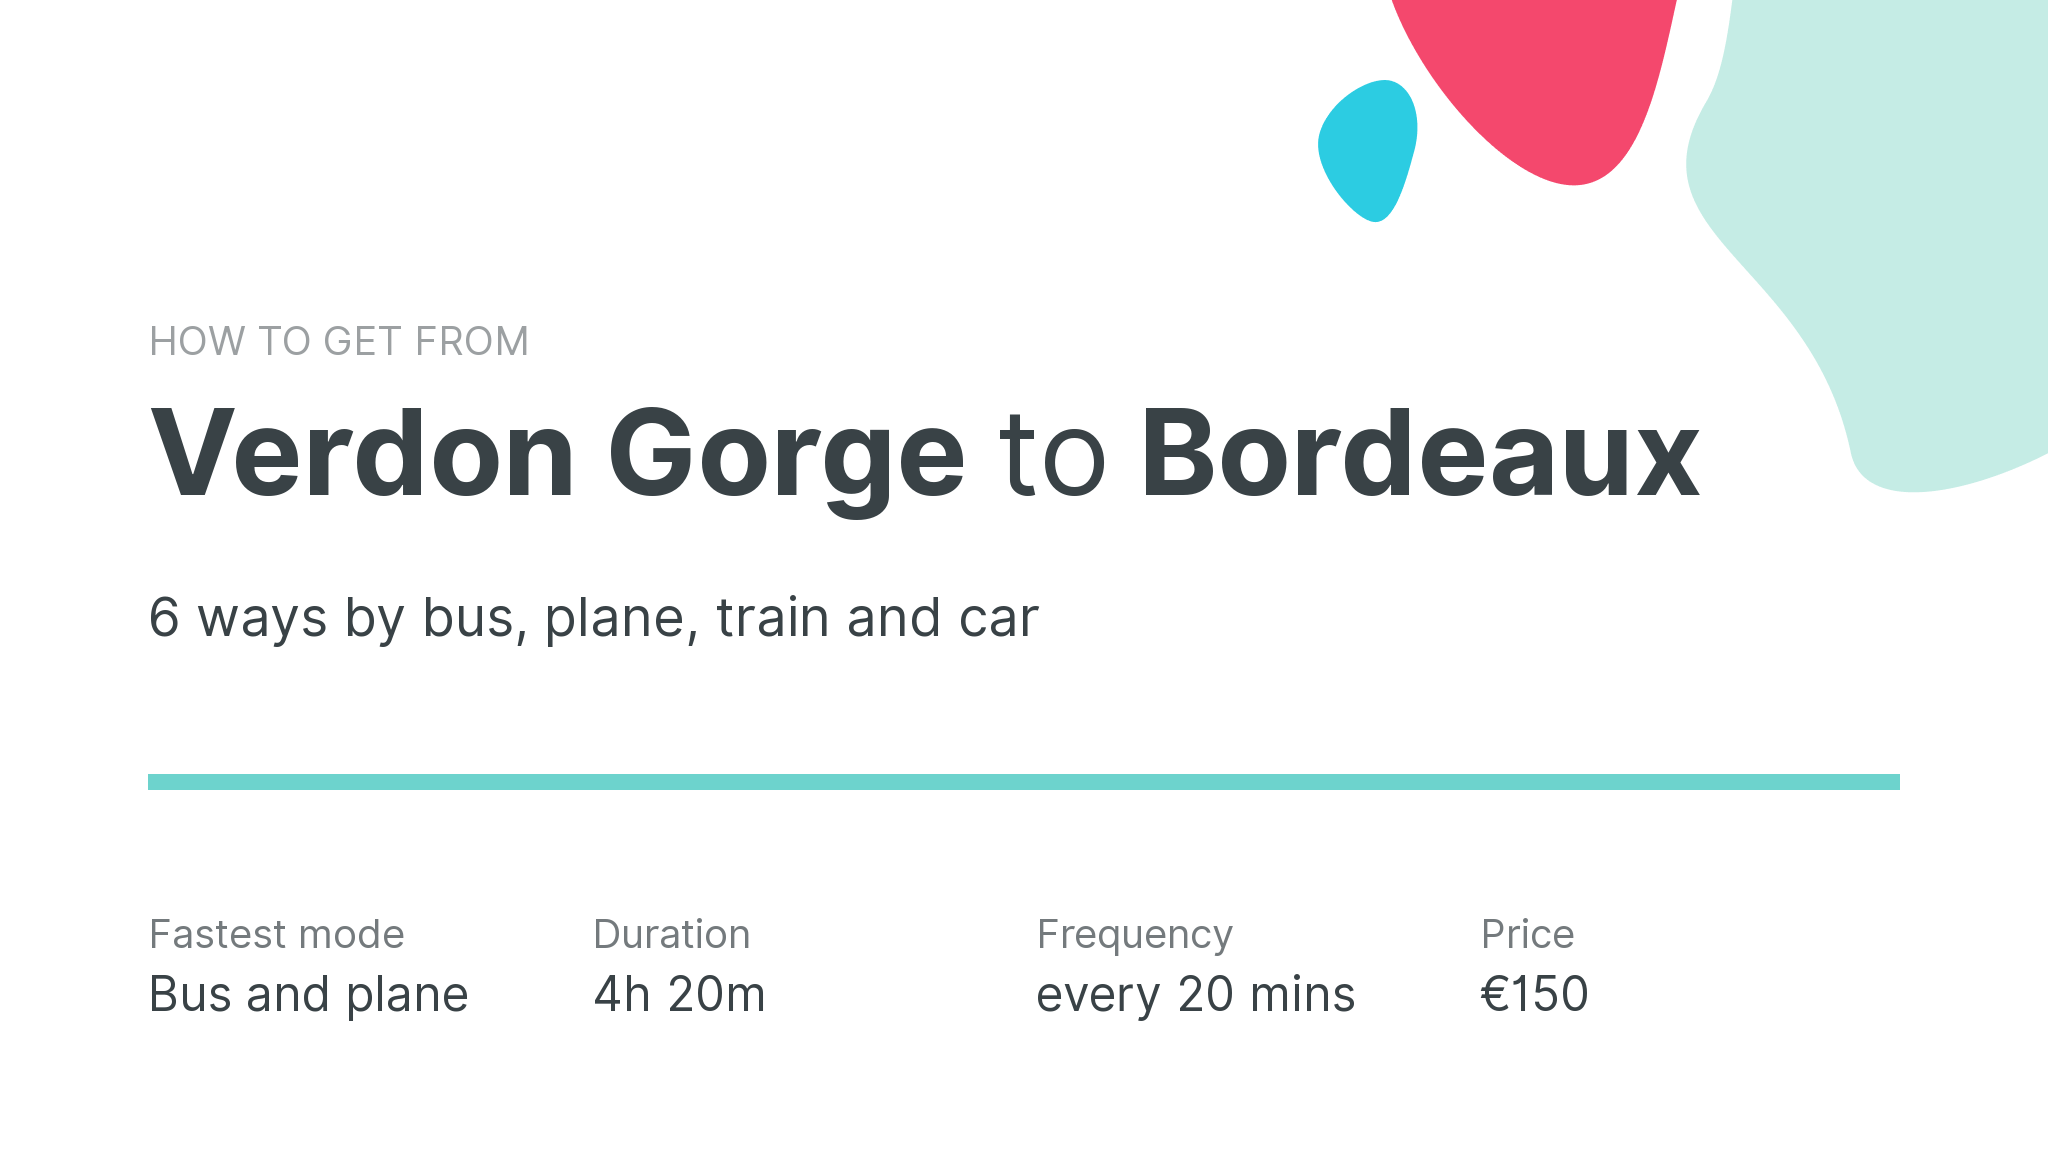 How do I get from Verdon Gorge to Bordeaux